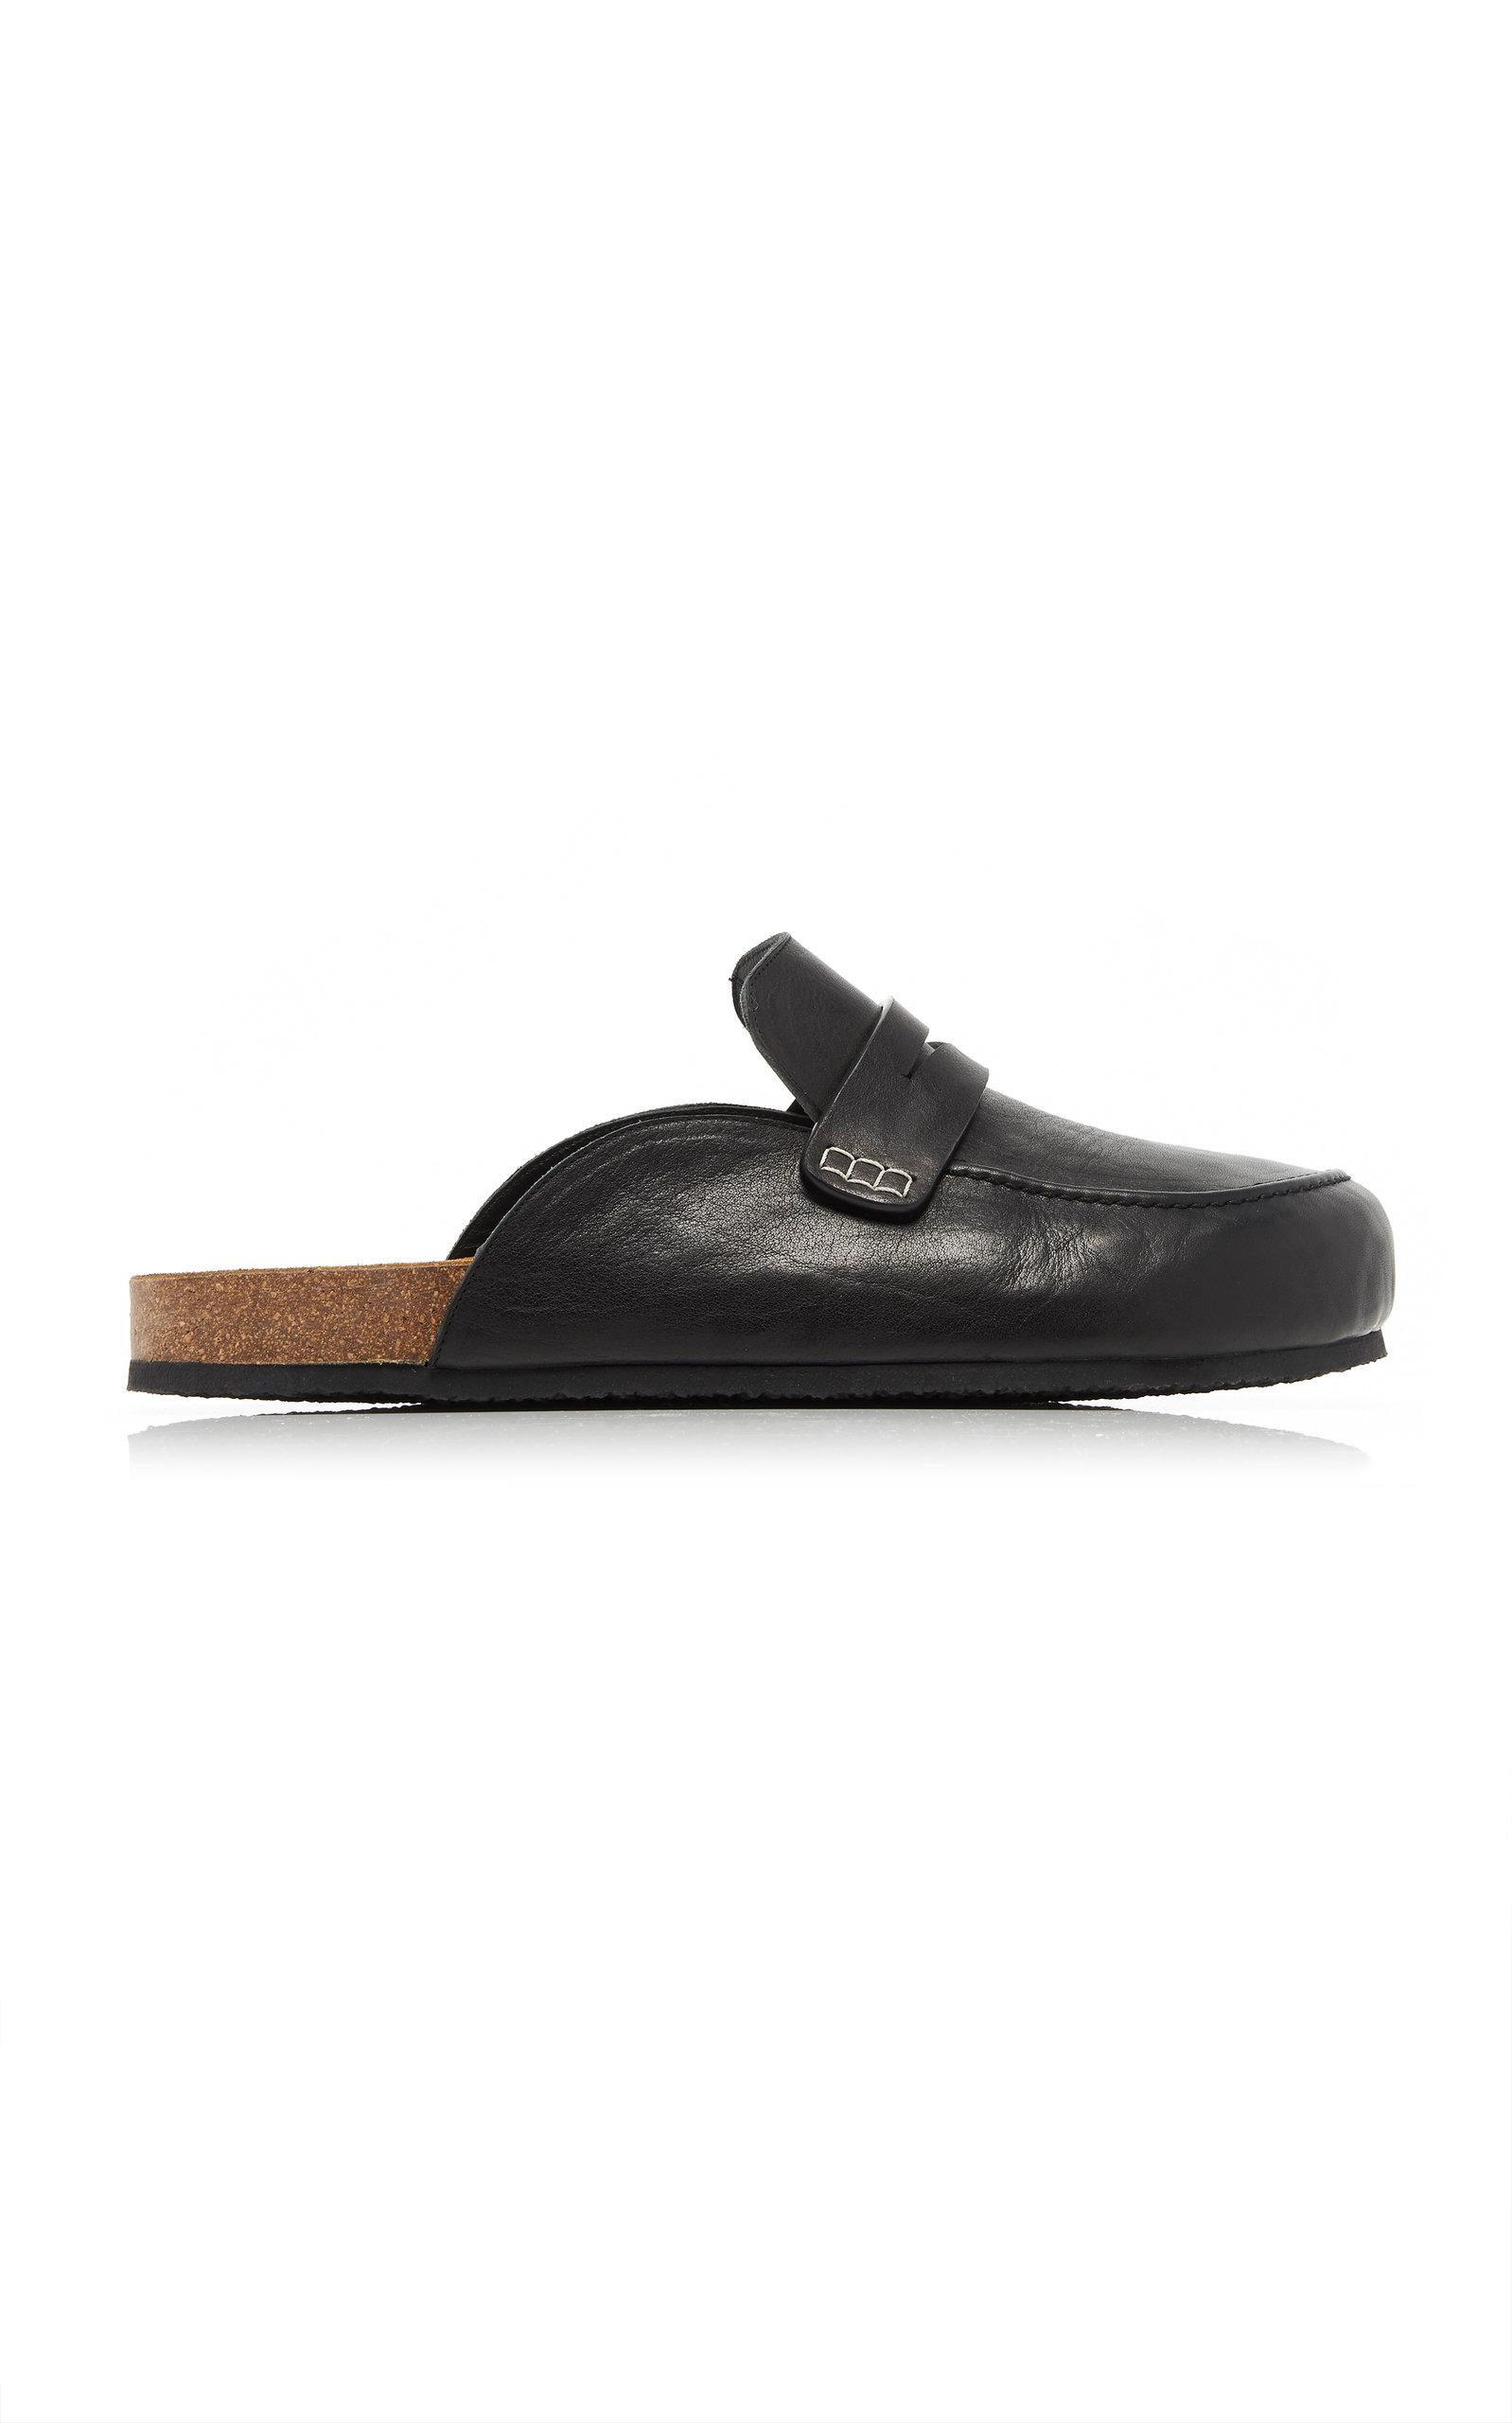 JW Anderson Logo-debossed Shearling Loafer Mules in Black for Men Mens Shoes Slip-on shoes Slippers 